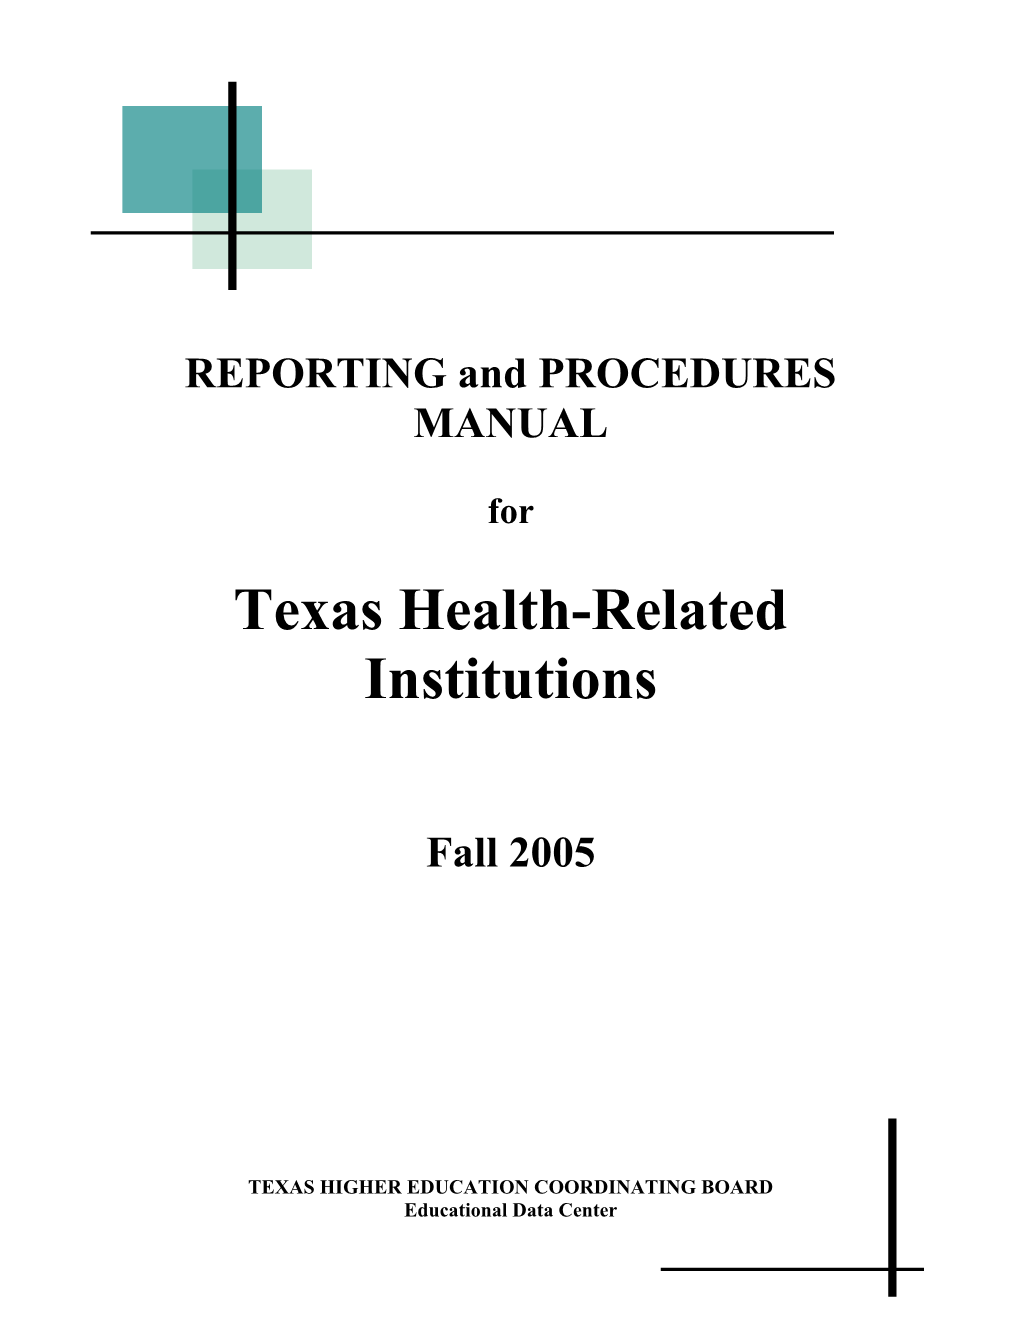 Reporting and Procedures Manual for Texas Health-Related Institutions, Fall 2005